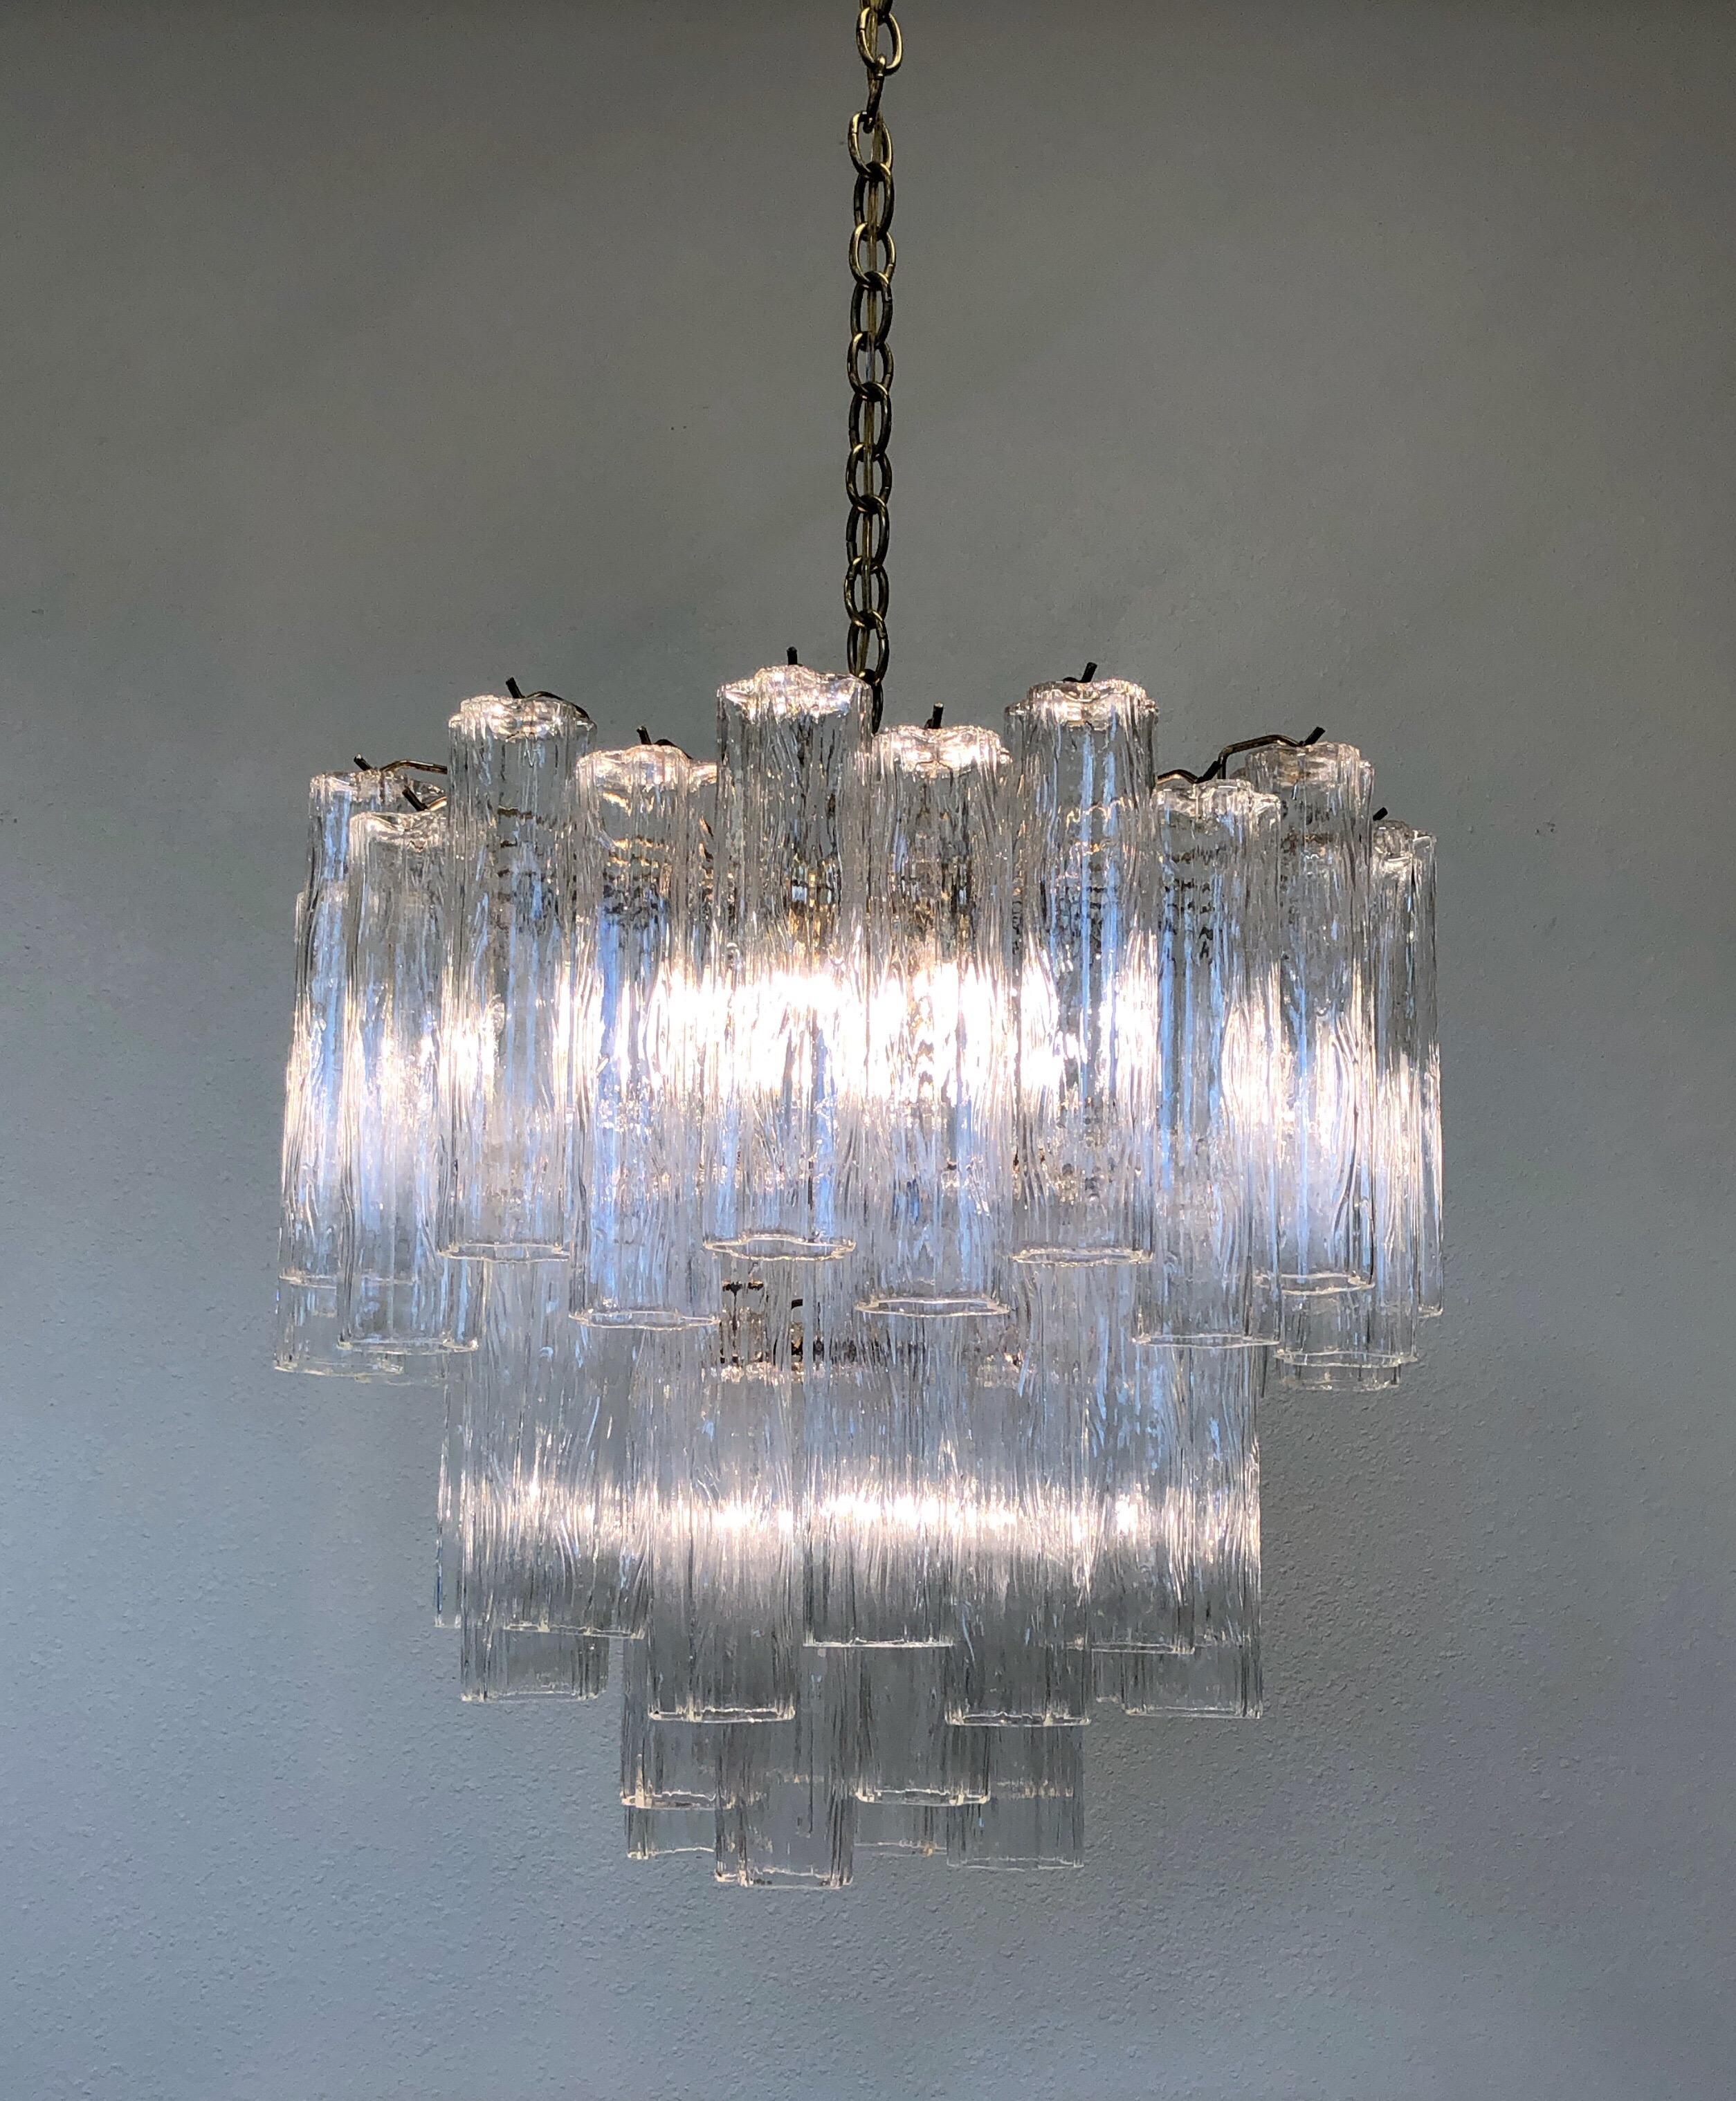 For your consideration a glamorous 1970s Italian Murano glass and brass “Tronchi” chandelier by Venini. Newly rewired. The chandelier takes eight candelabra light bulbs and one regular Edison light bulb.
Dimensions without chain- 24”diameter